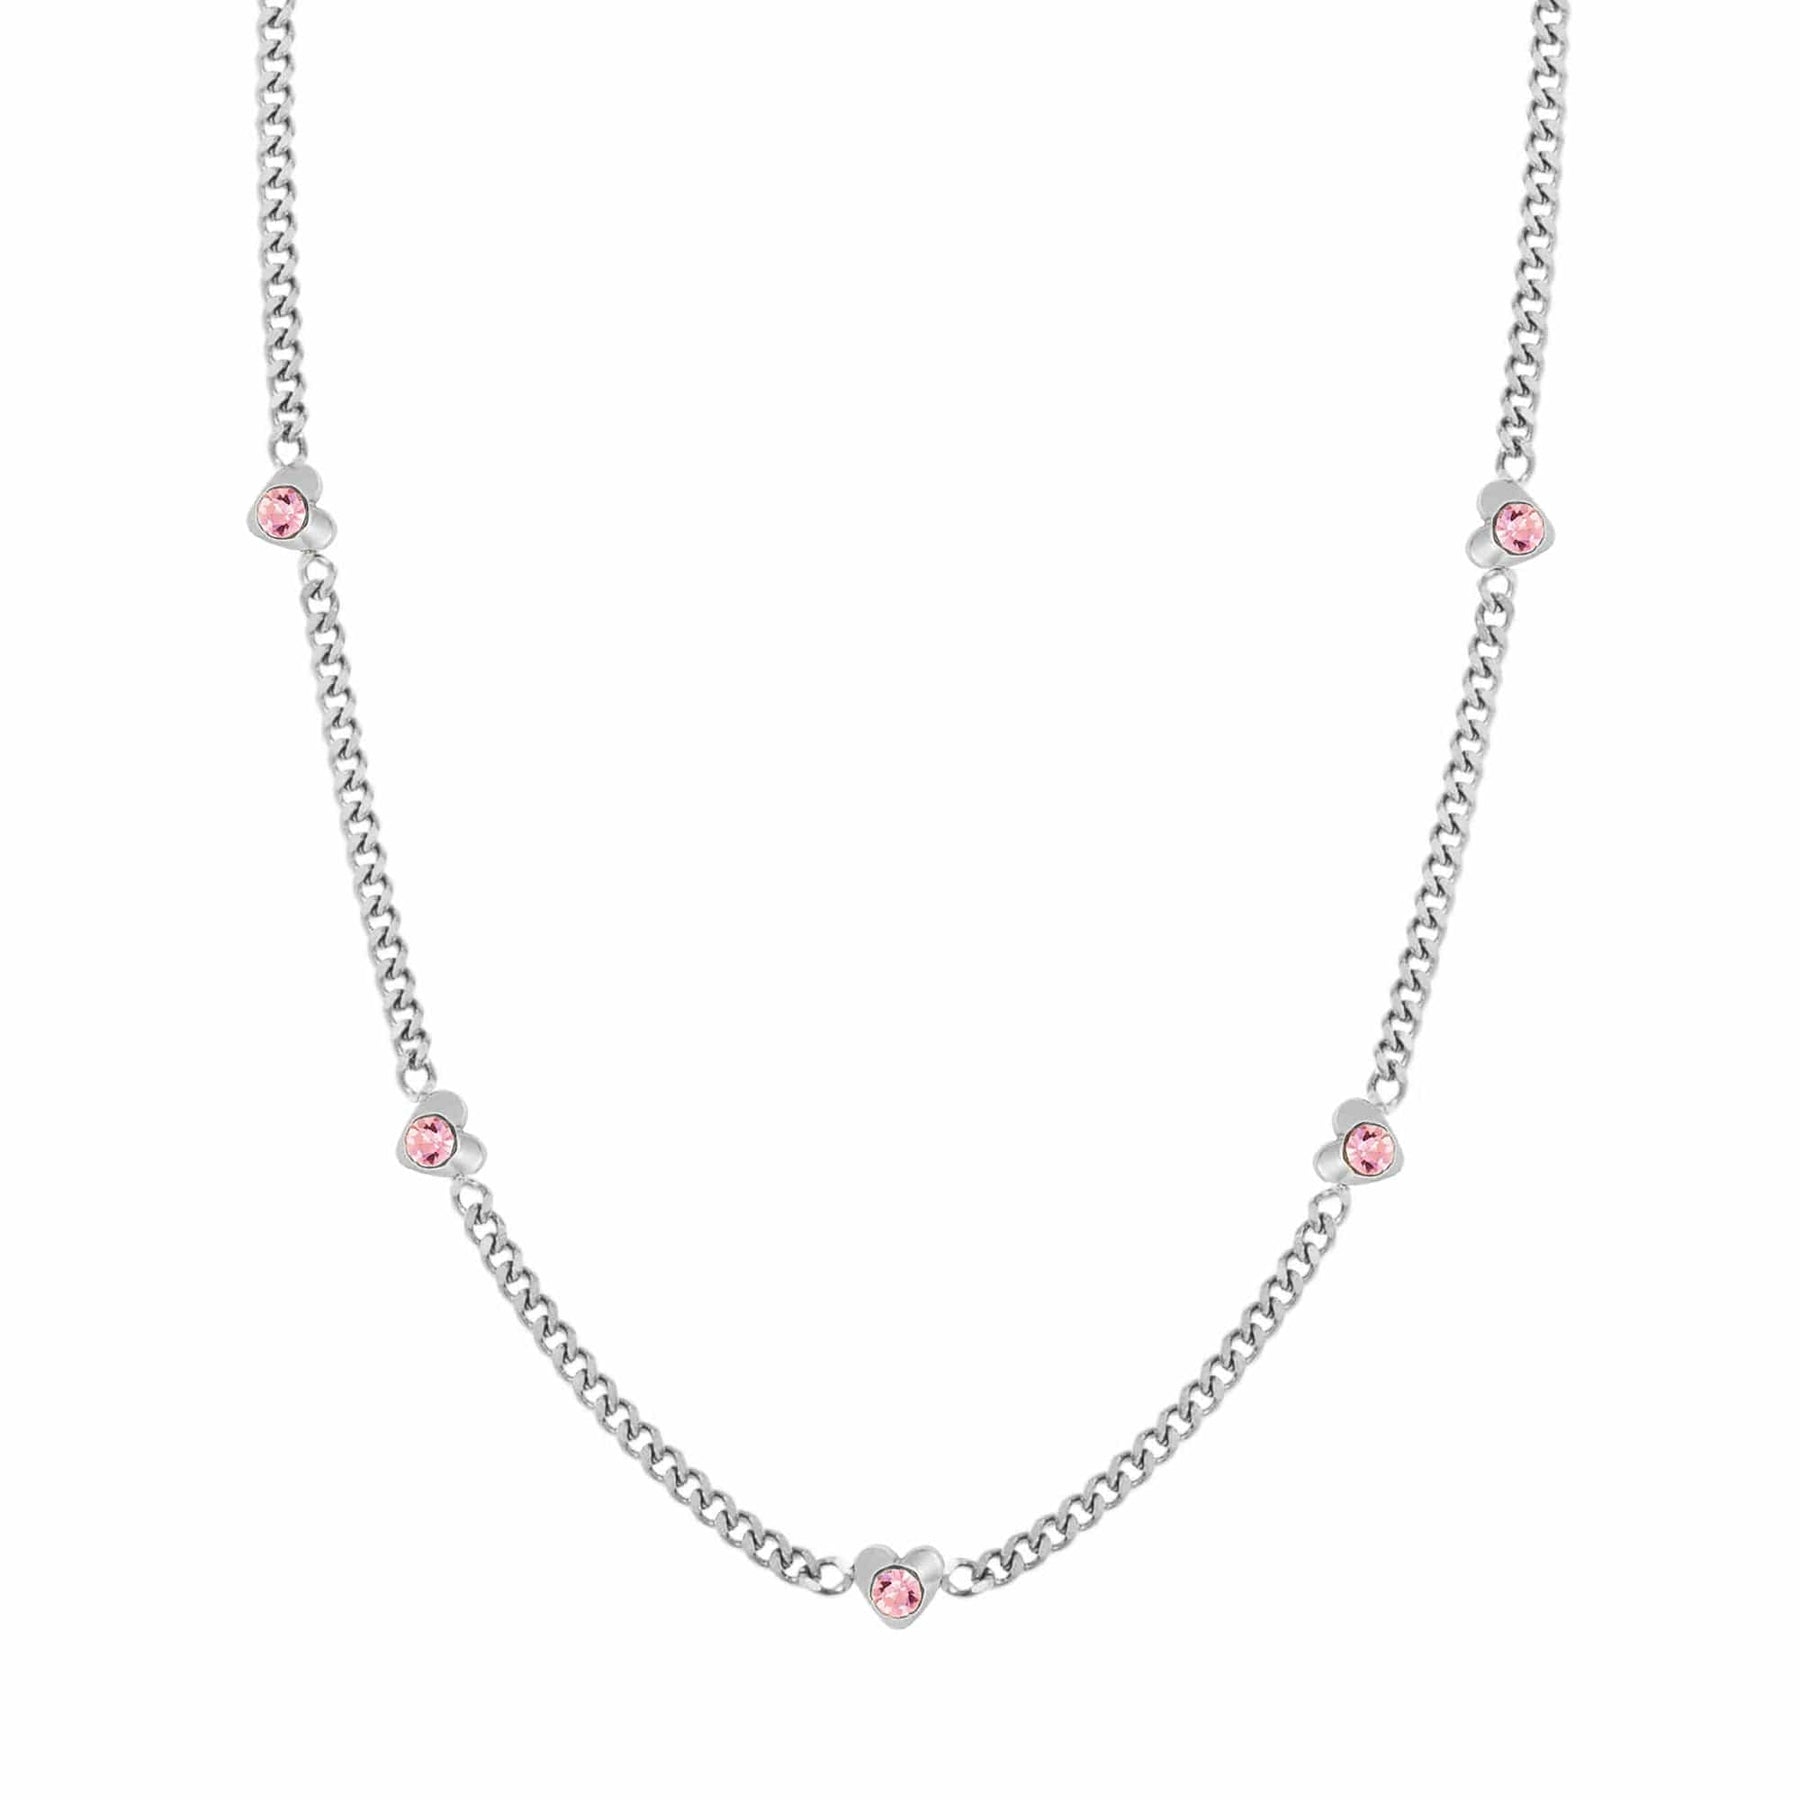 BohoMoon Stainless Steel Sweetheart Necklace Silver